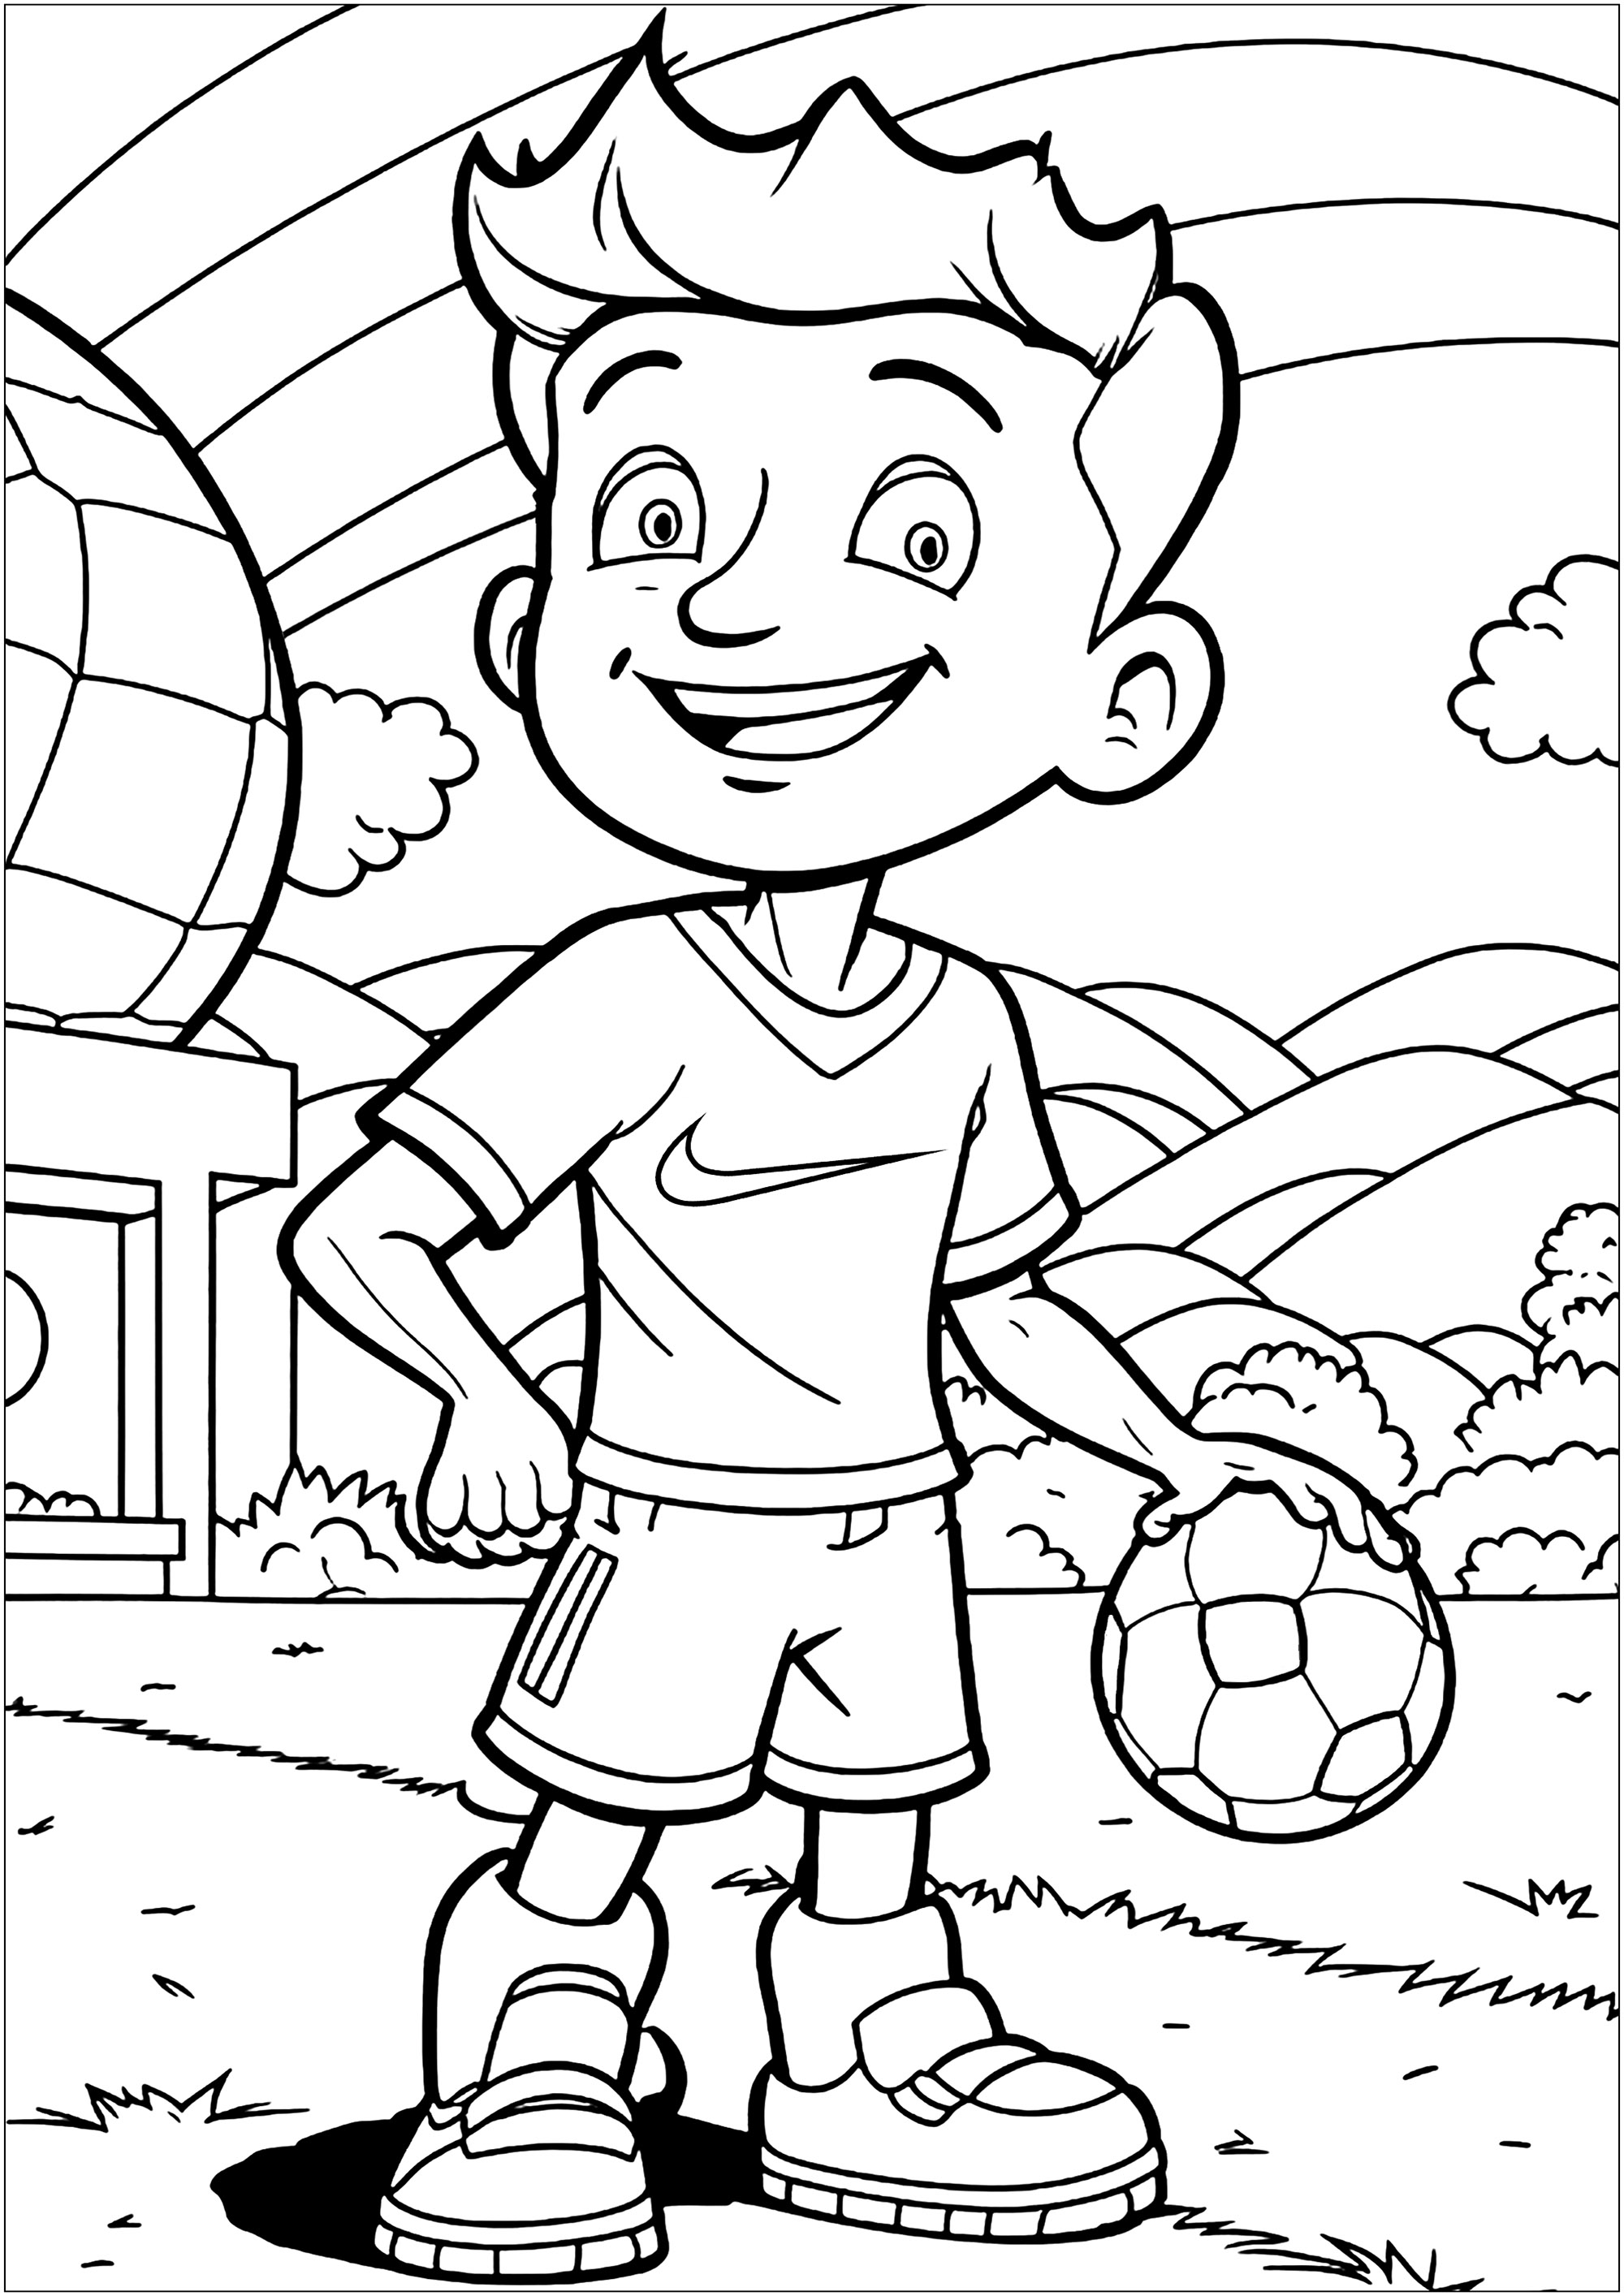 Coloring of a young soccer player on his field. Little artists will have fun choosing colors for the soccer jersey, the beautiful Nike logo, the ball and the field.They can also use their imagination to add additional details and create their own version of this coloring page.